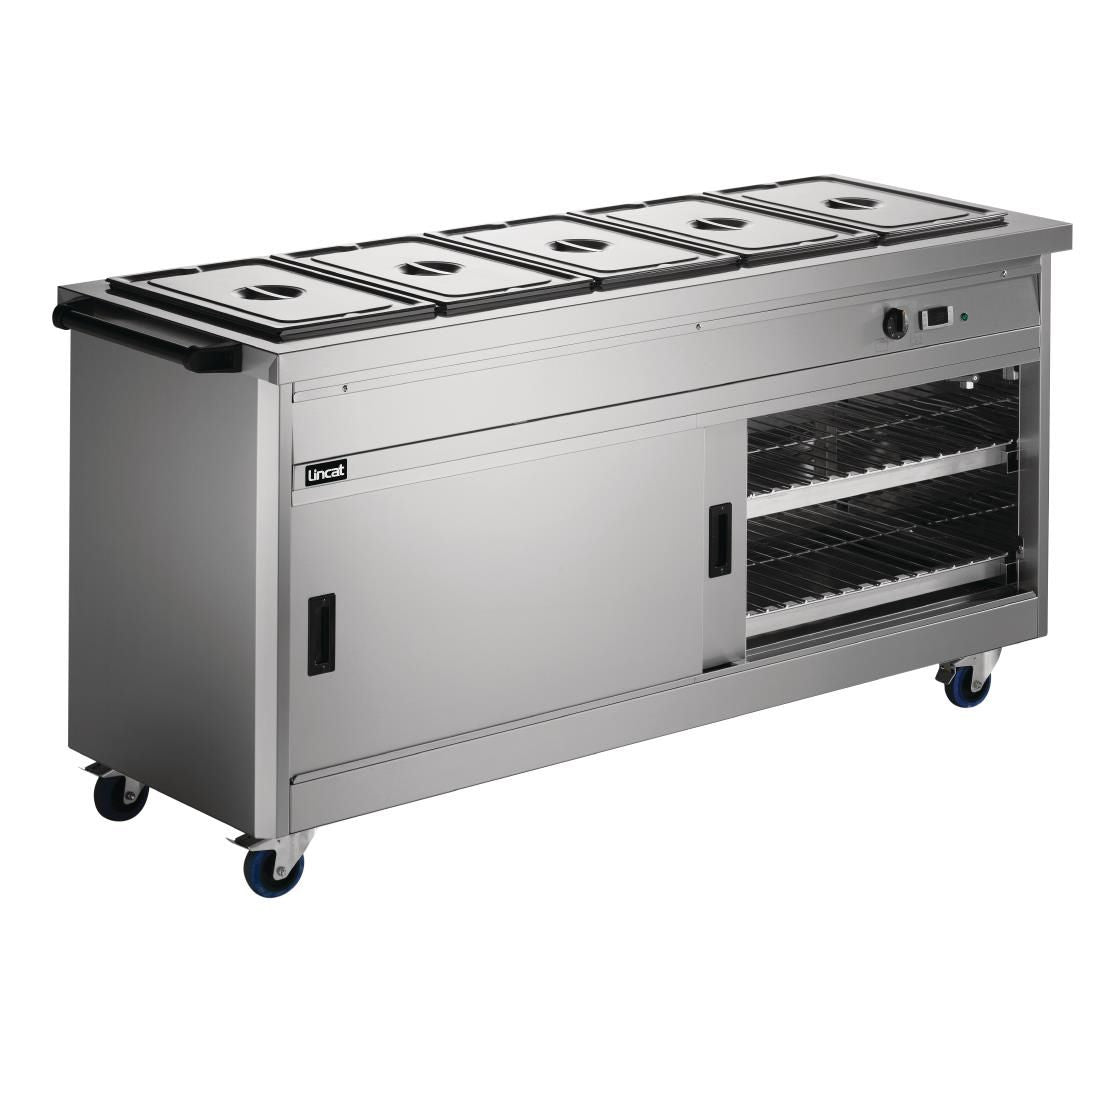 GJ577 Lincat Panther 670 Series Hot Cupboard with Bain Marie P6B5 JD Catering Equipment Solutions Ltd